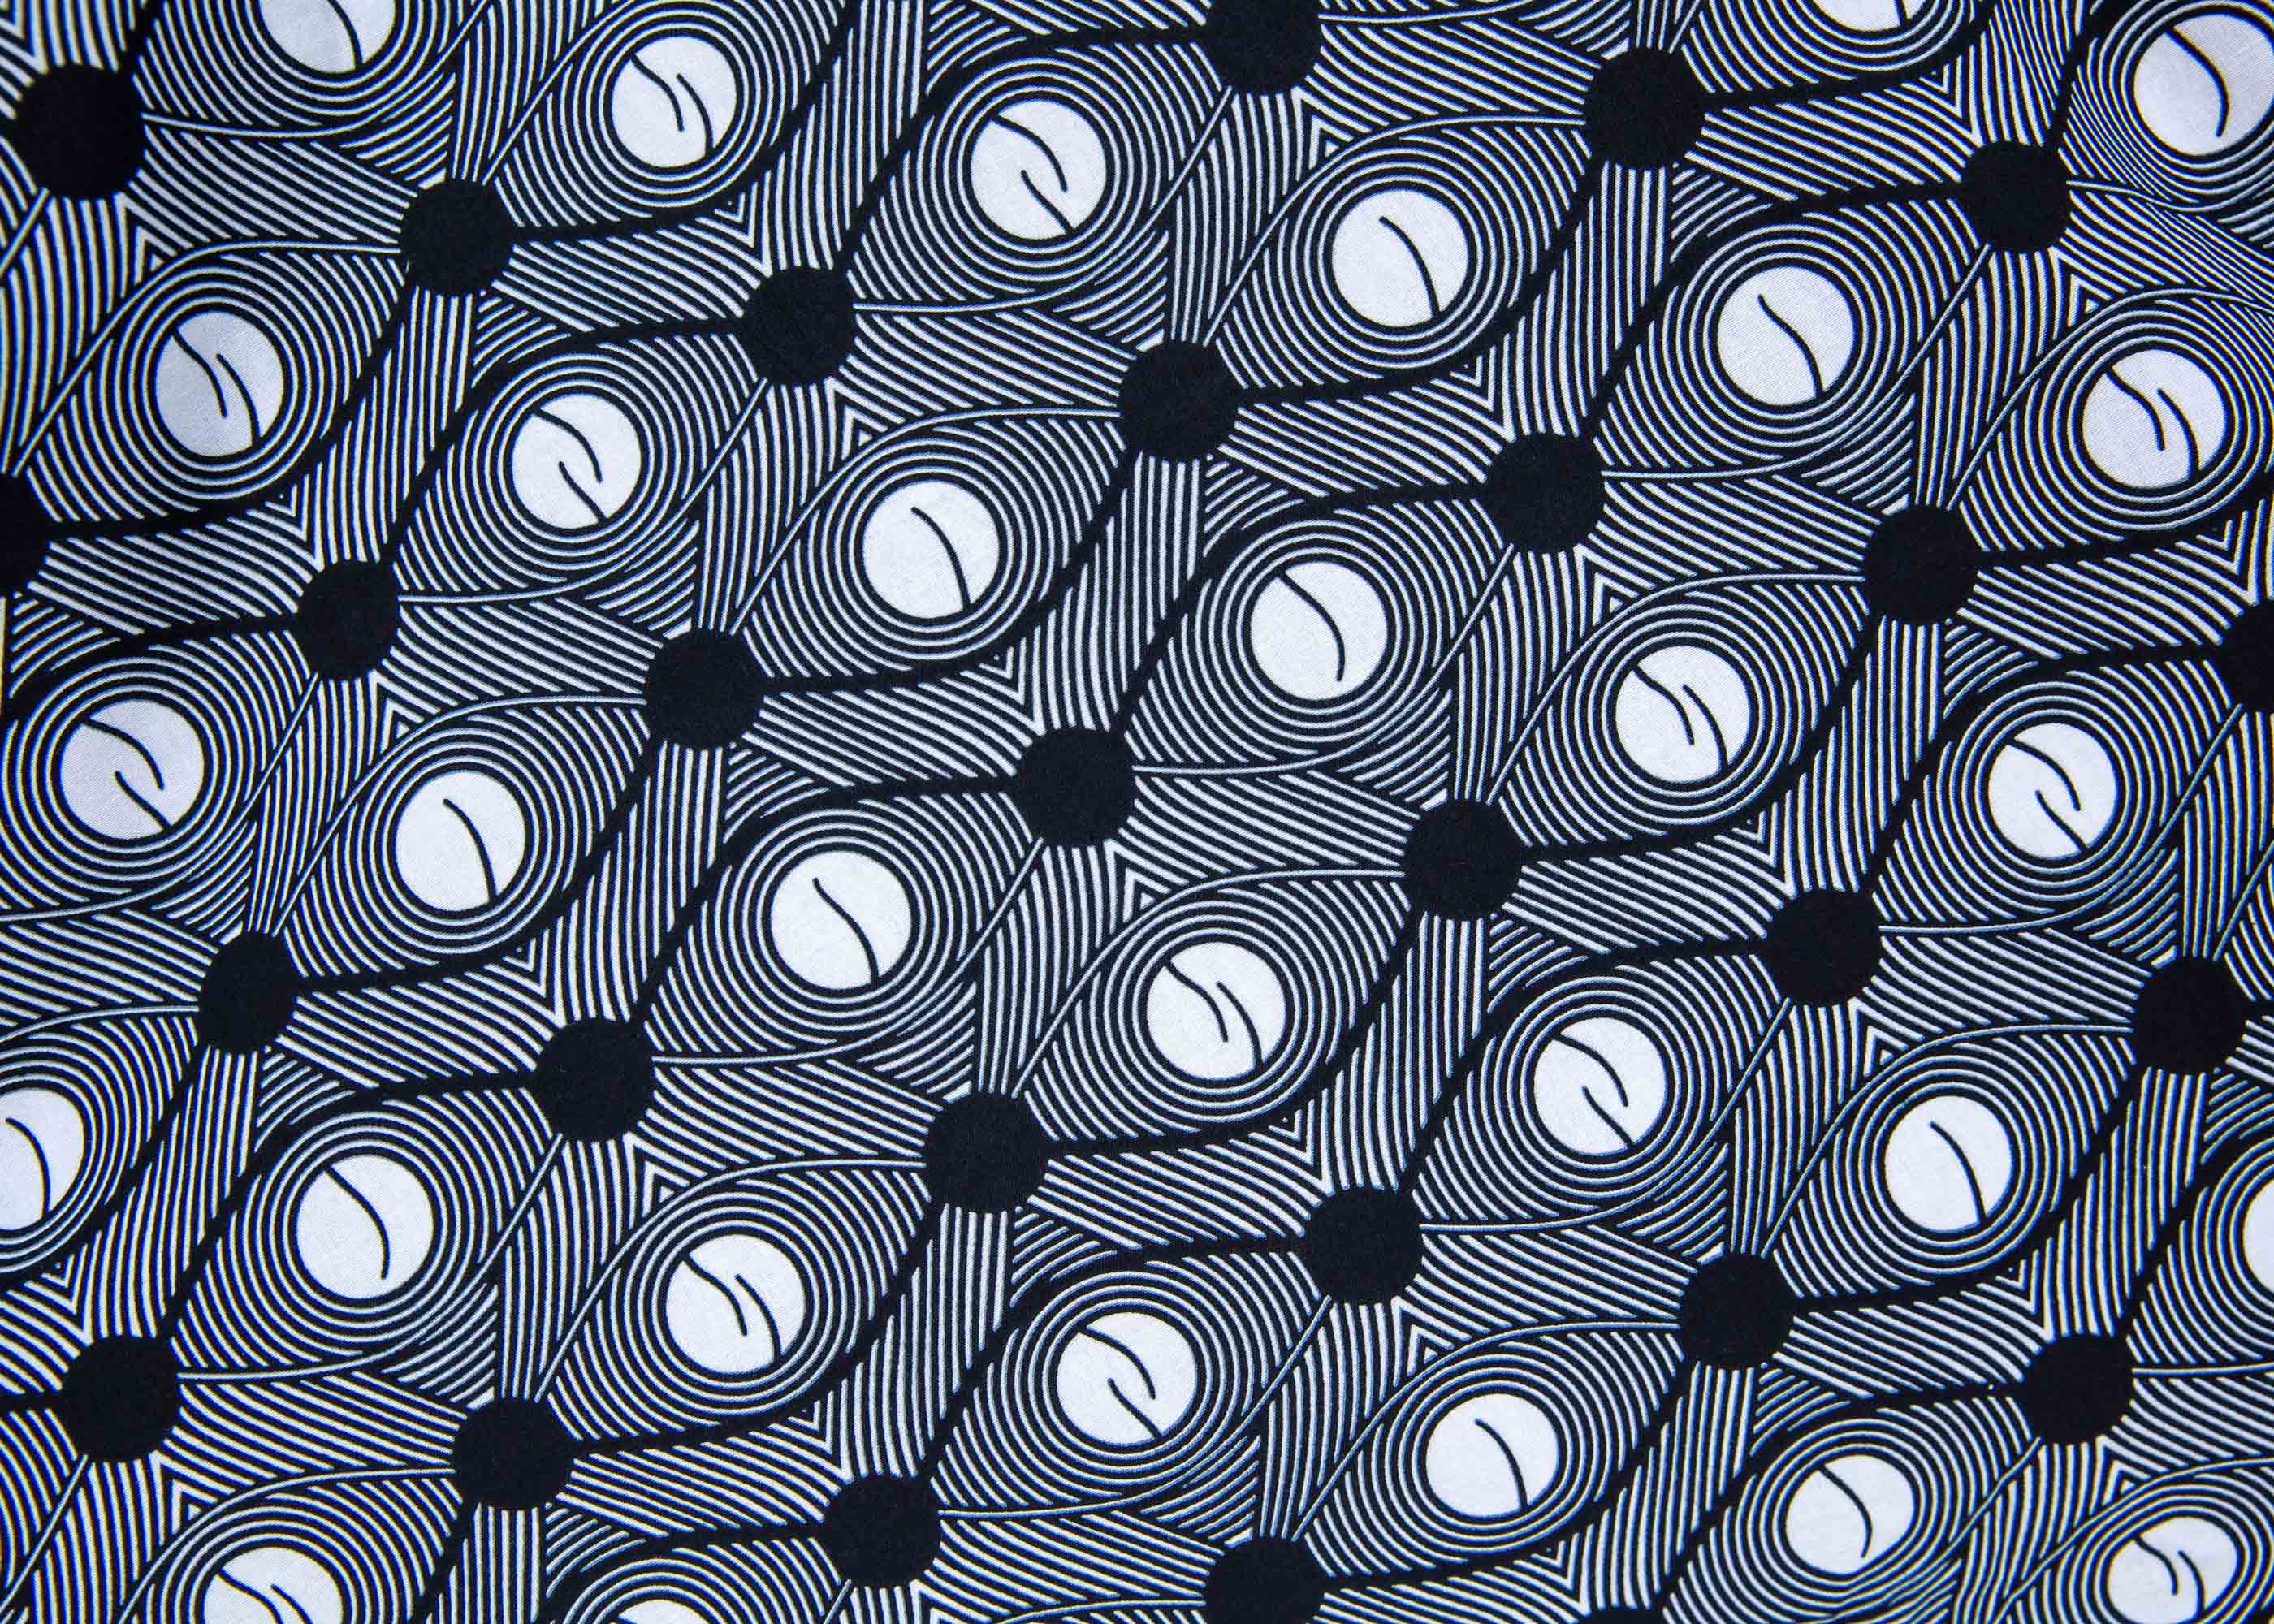 Display of a black and white pinball design dress